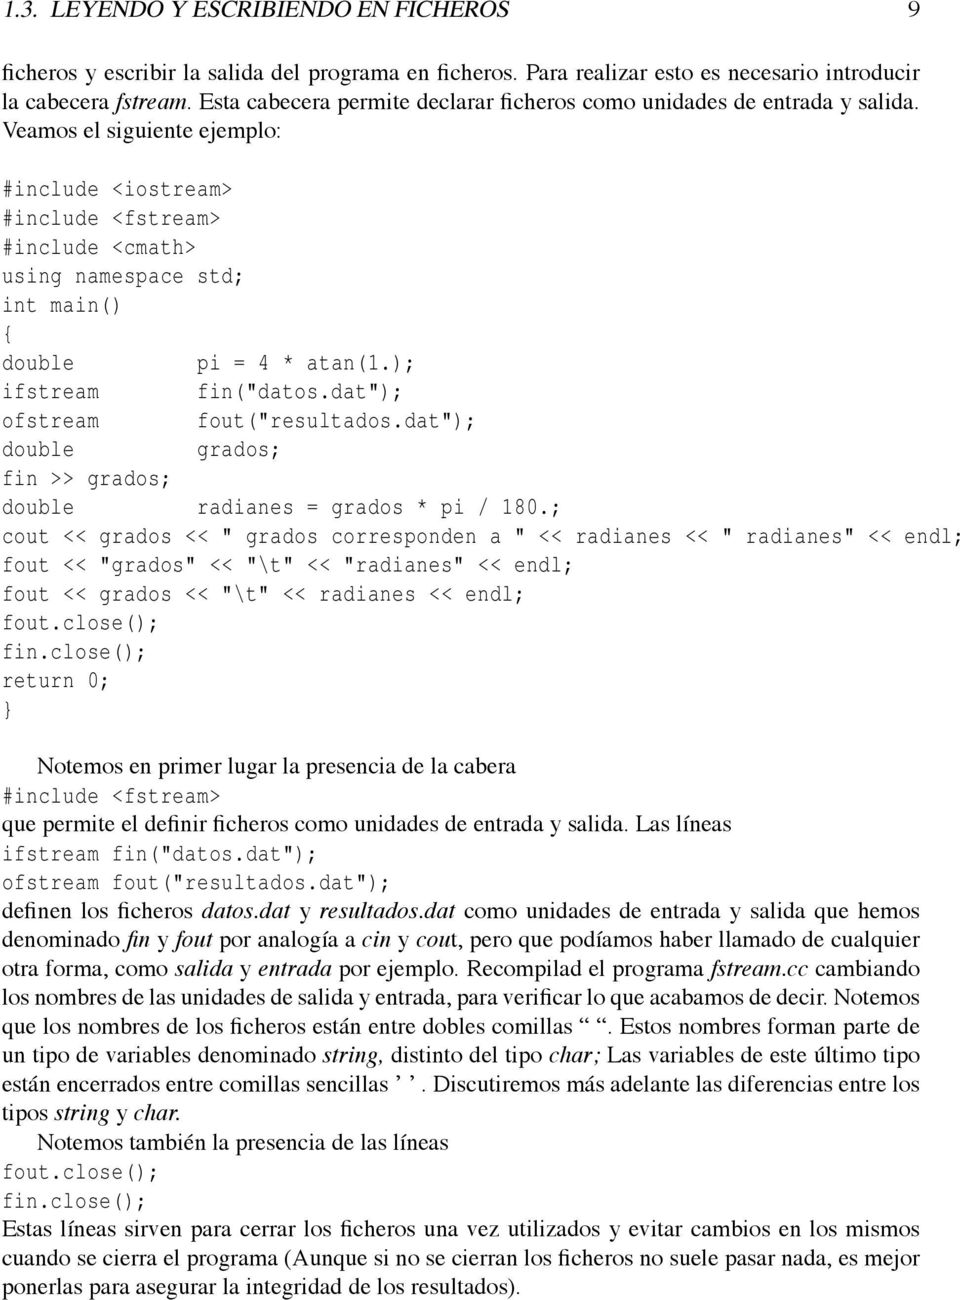 Veamos el siguiente ejemplo: #include <iostream> #include <fstream> #include <cmath> using namespace std; int main() { double pi = 4 * atan(1.); ifstream fin("datos.dat"); ofstream fout("resultados.